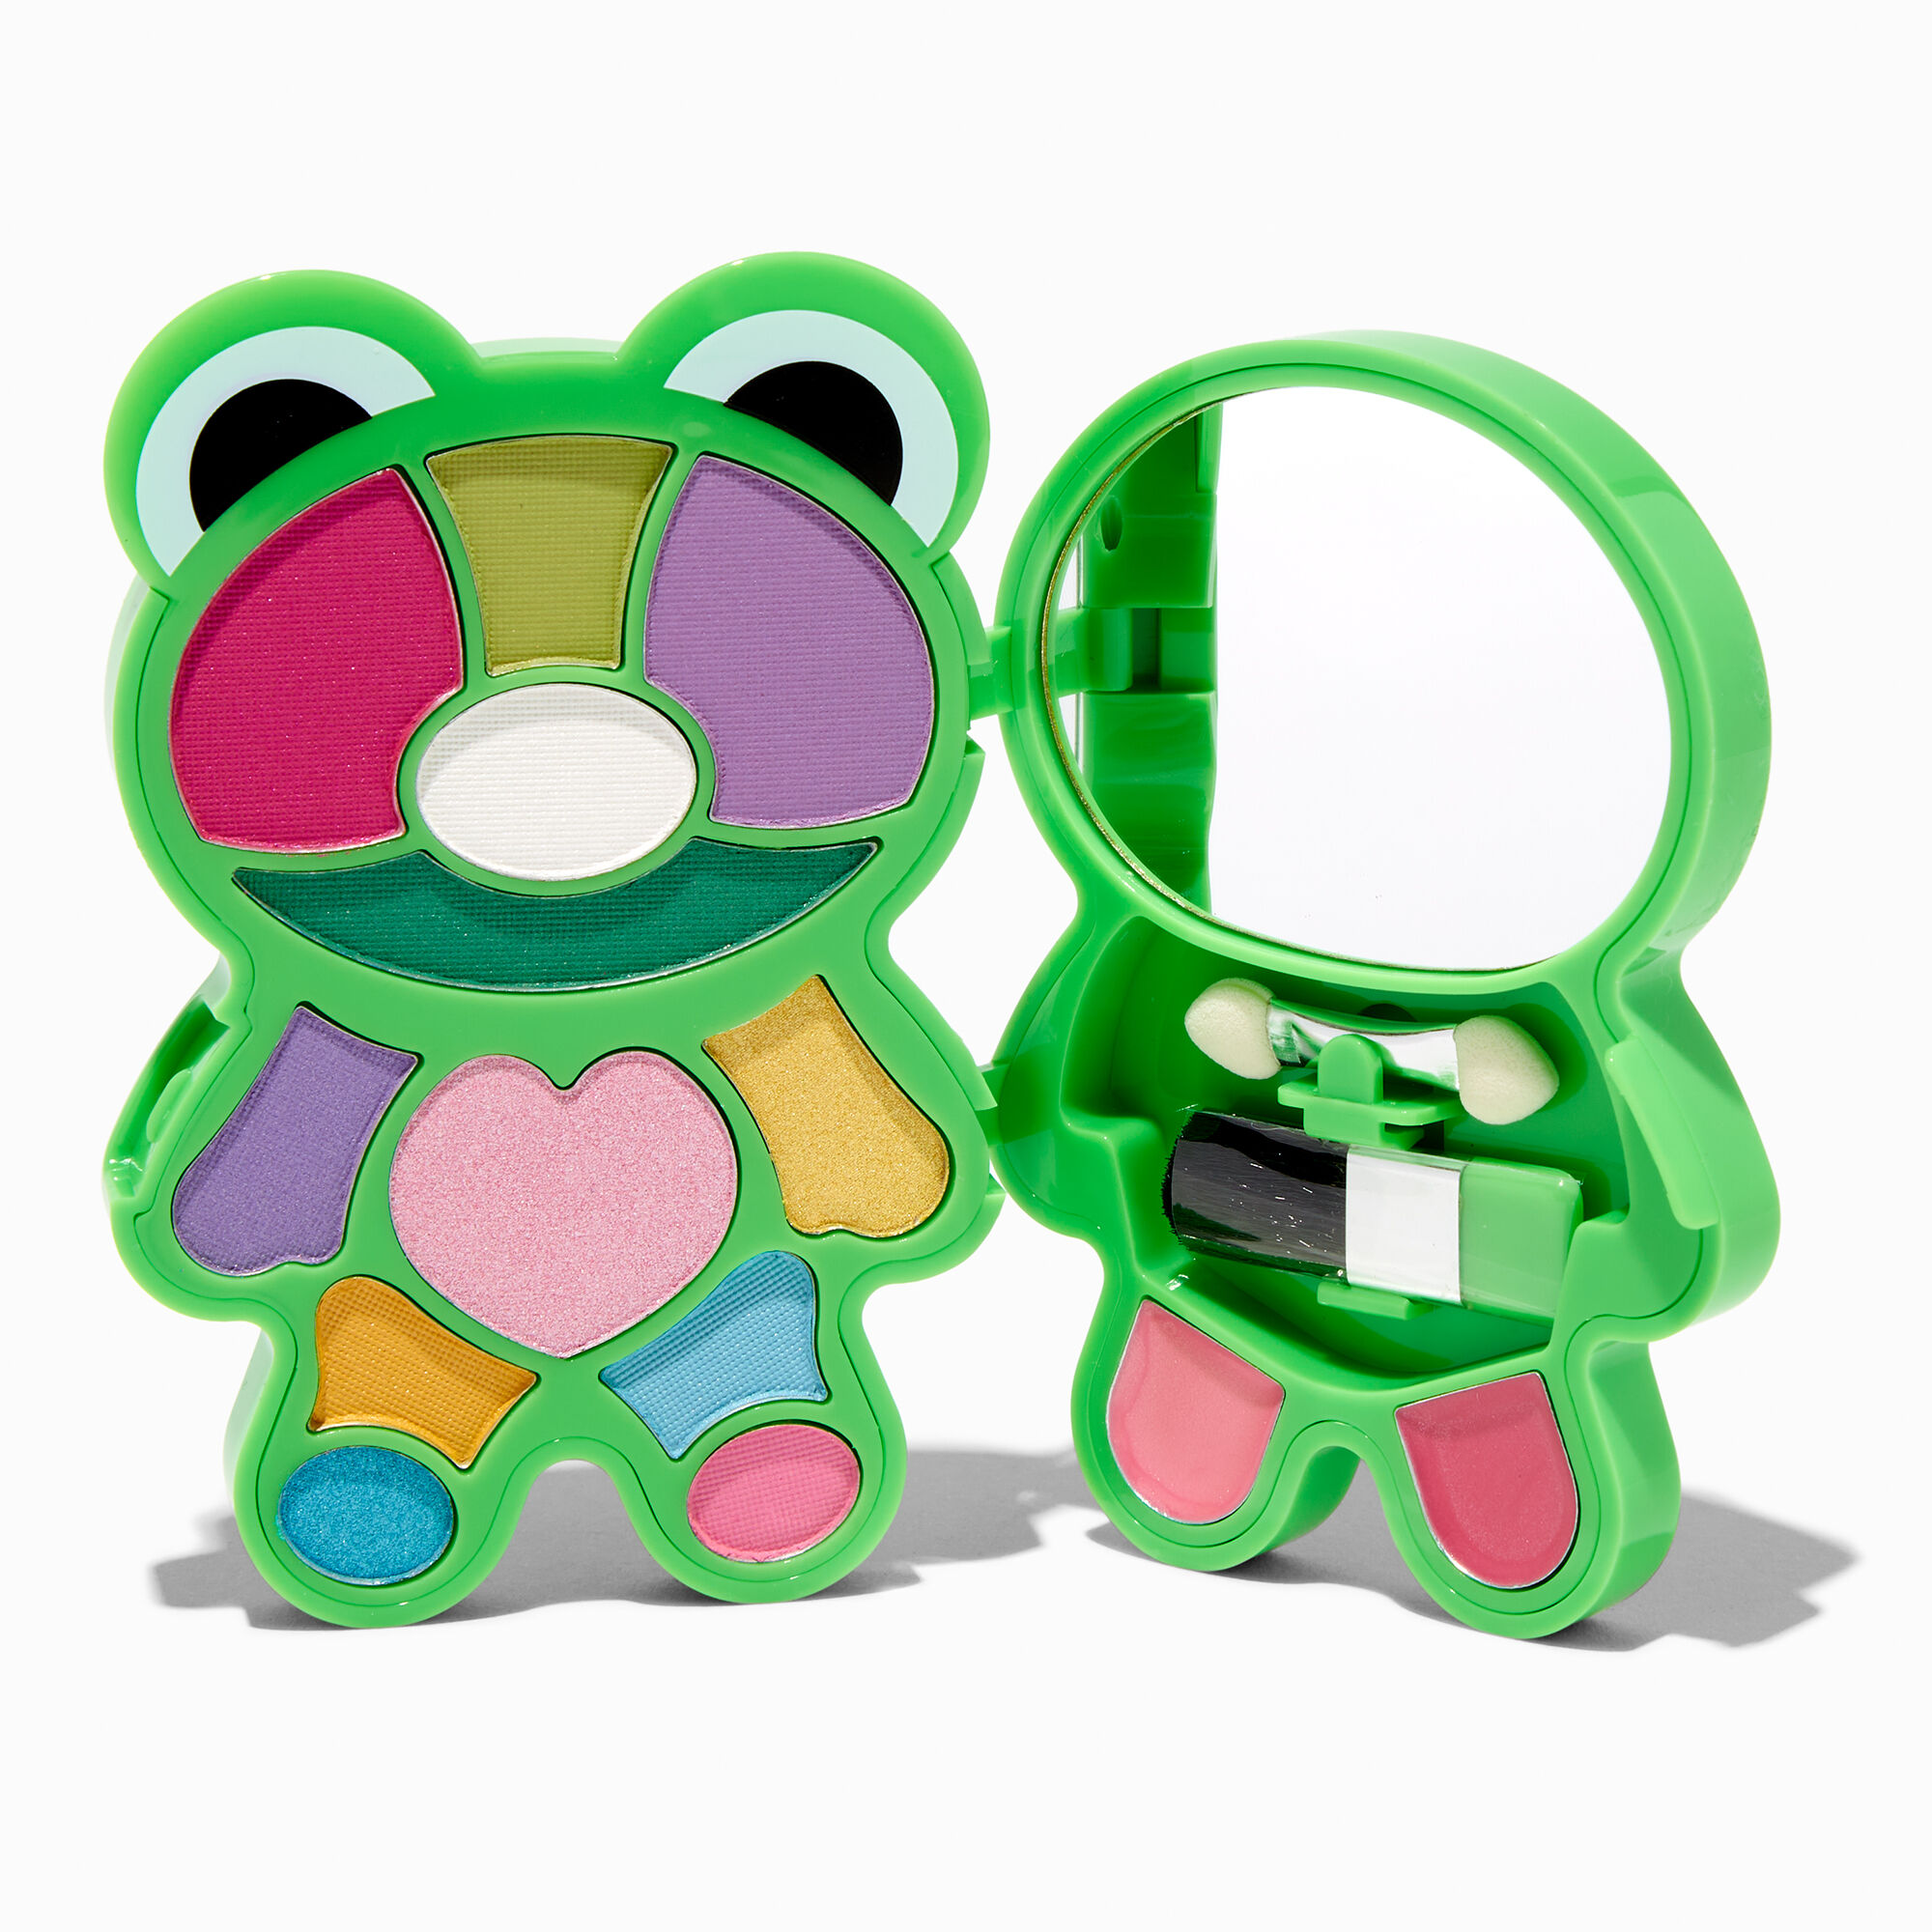 View Claires Frog Compact Makeup Set Green information